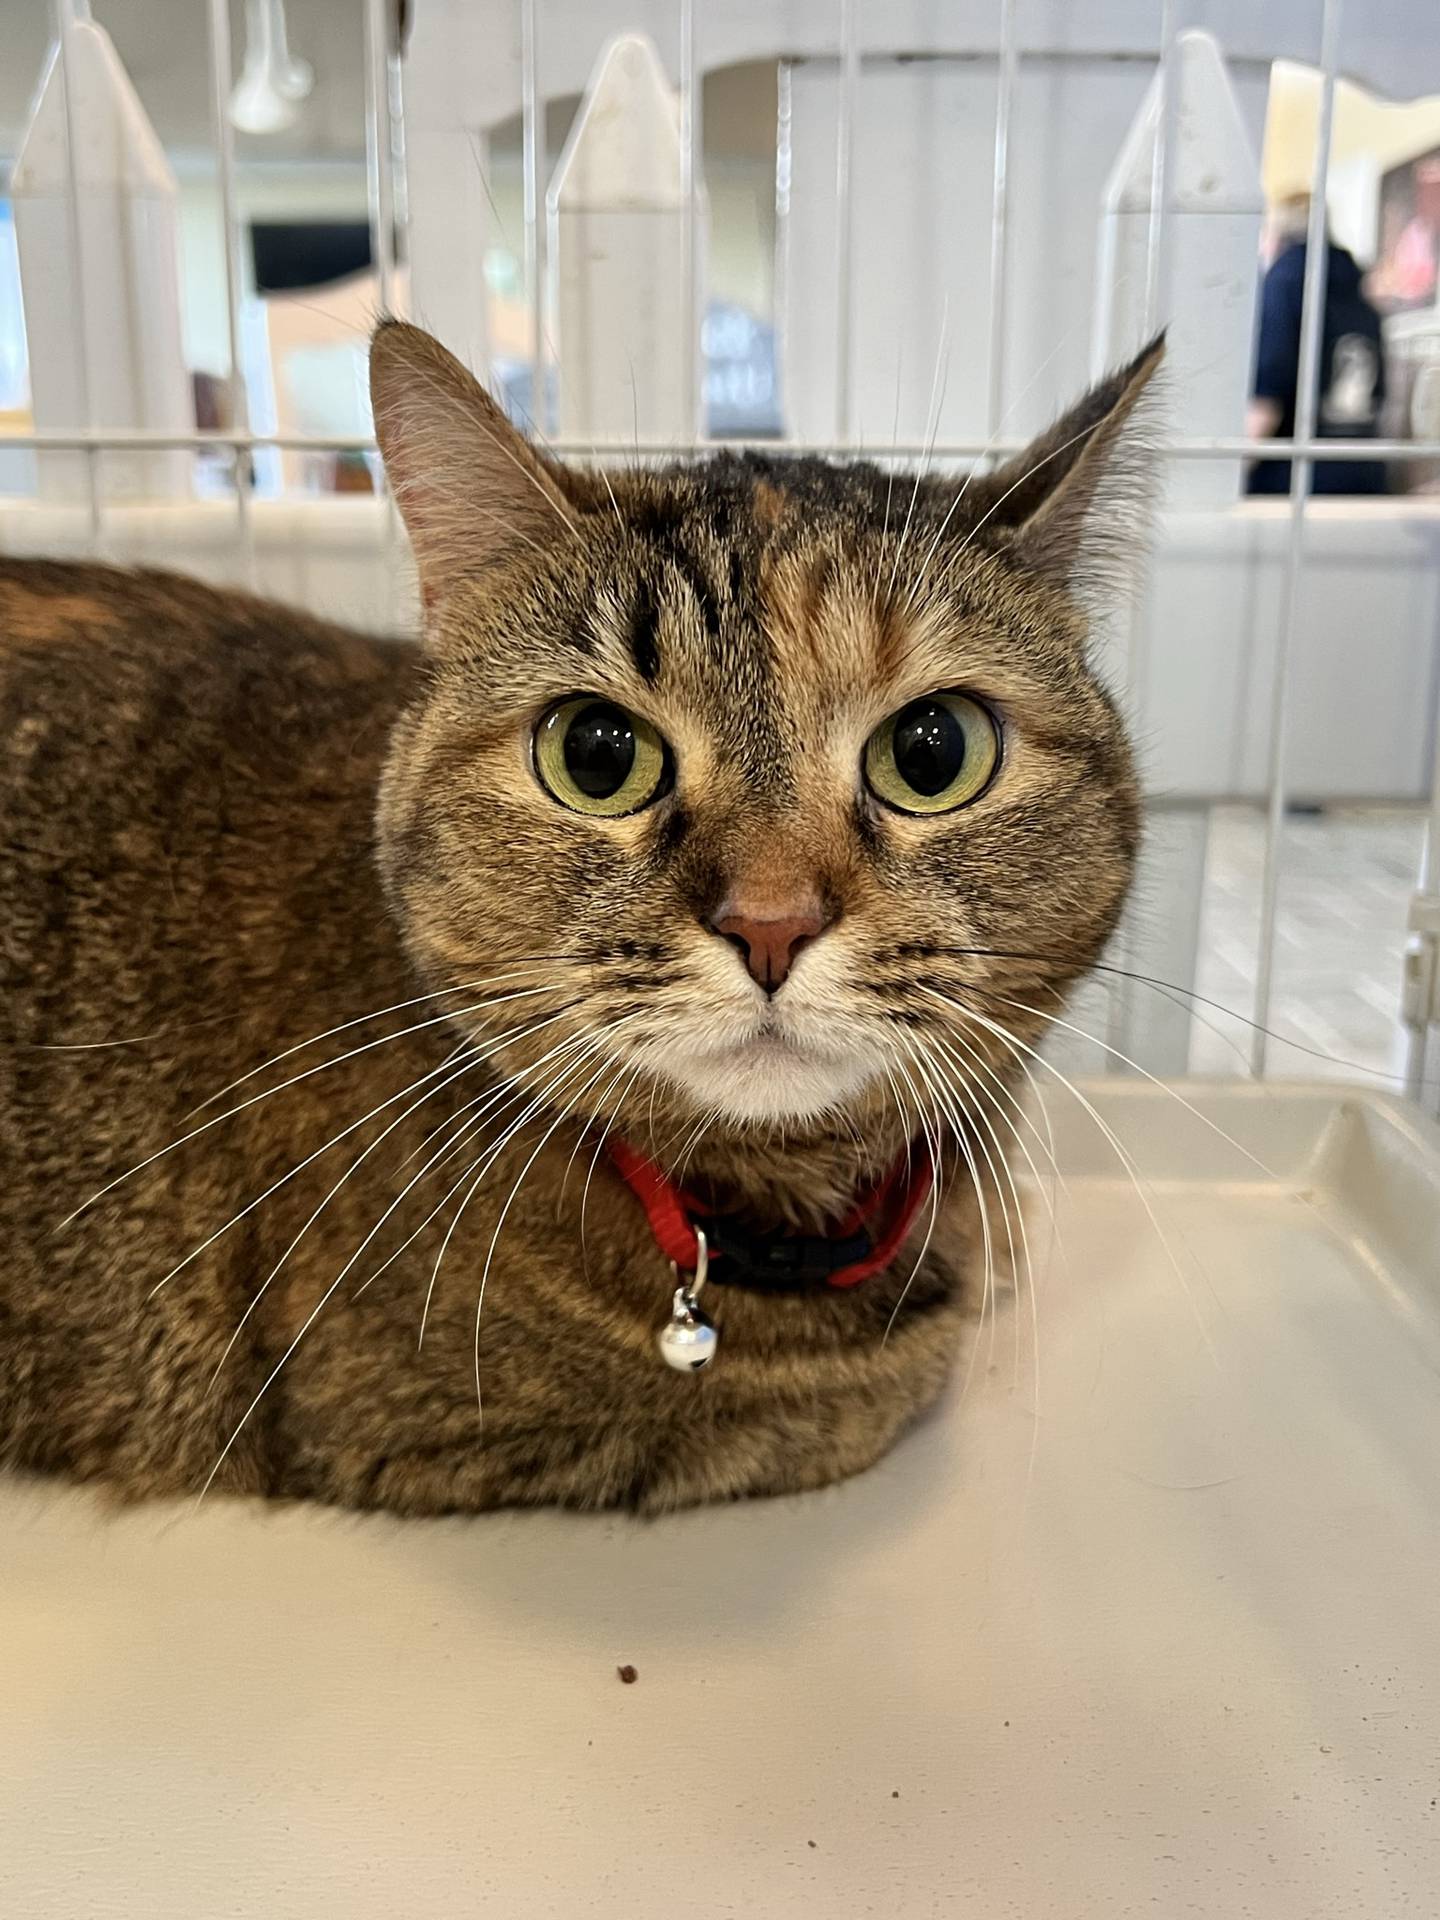 Klalifah is a 7-yearold female torbie that was relinquished because her owner was moving. She is needs a home where she can be a cherished companion. She is playful at times, likes pets and attention, and would love to sleep in bed with her adopters. To meet Klalifah, email Catadoptions@nawsus.org. Visit nawsus.org.